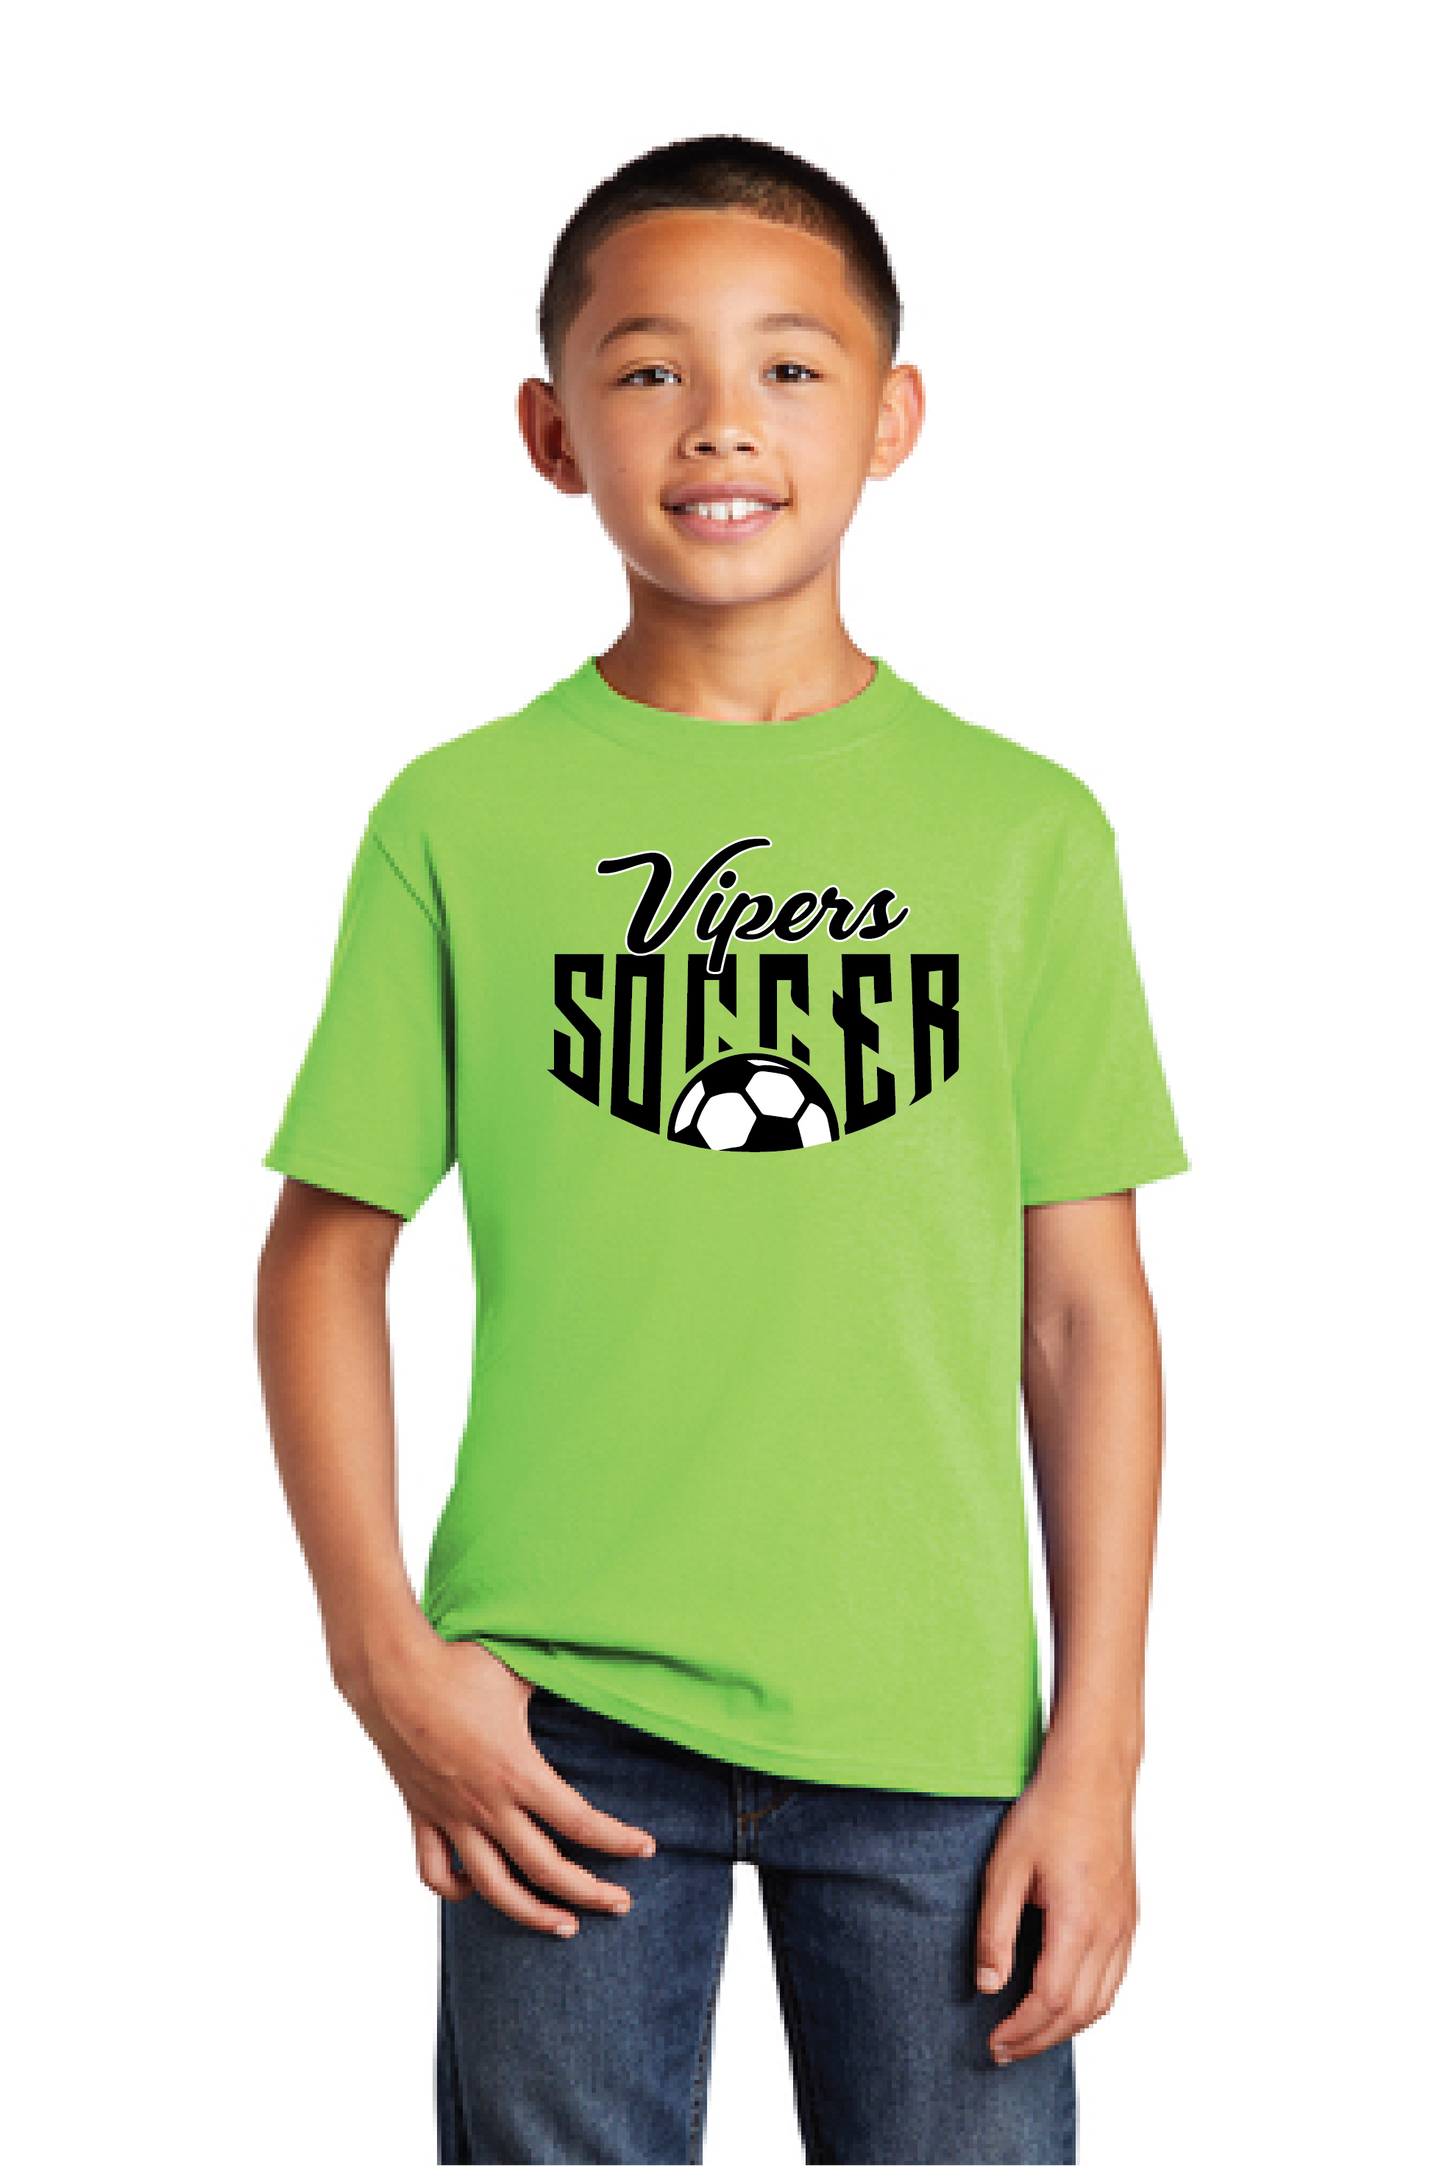 Vipers Soccer Cool